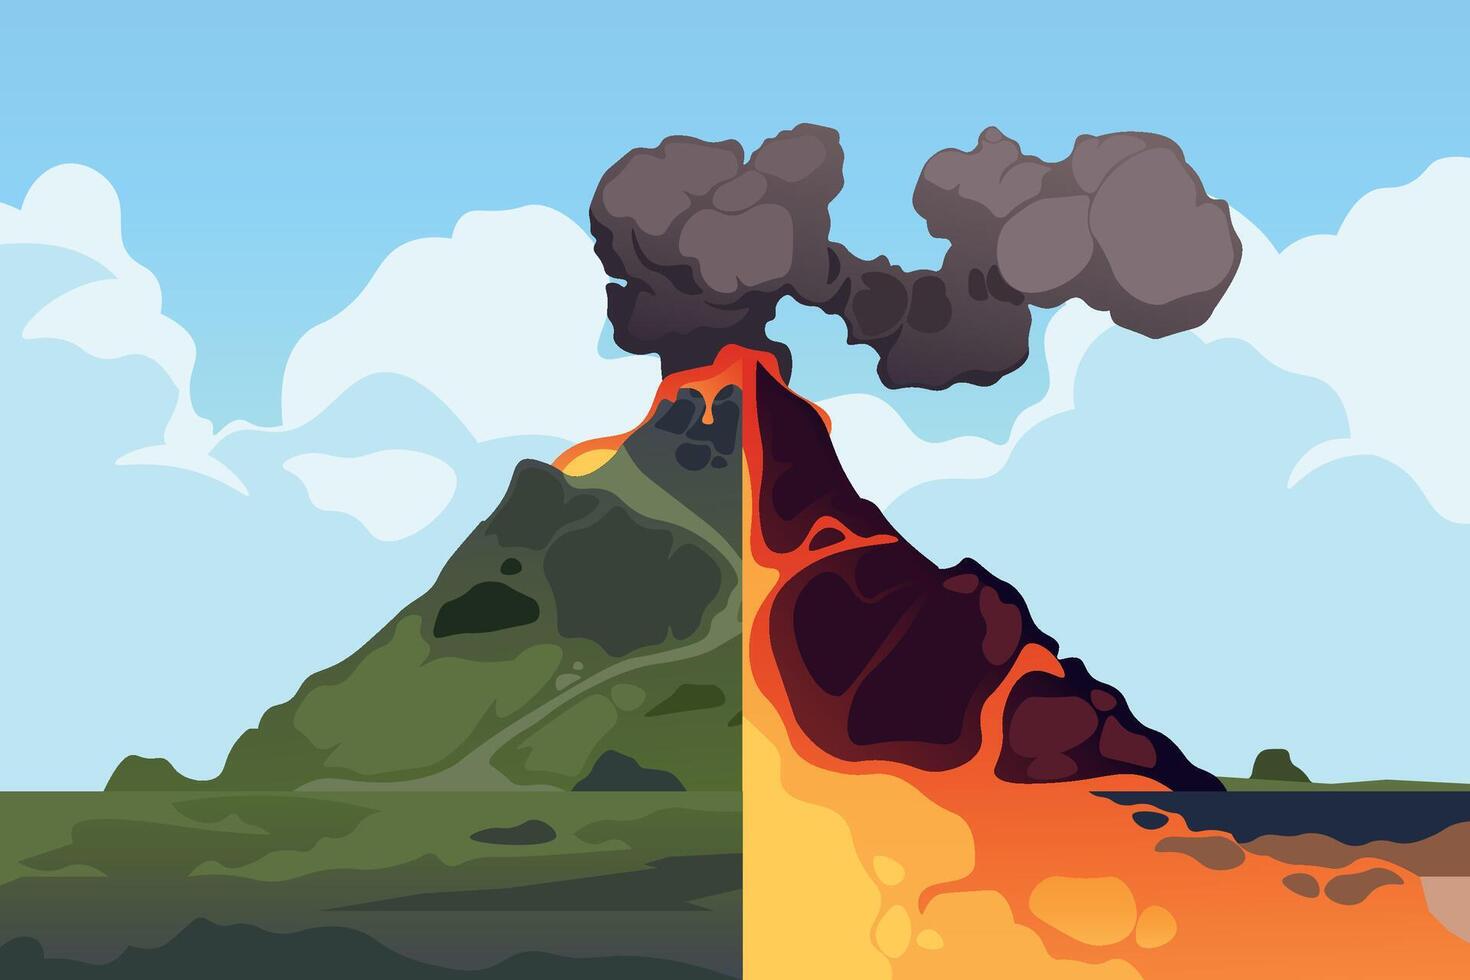 Volcano cross section. Volcanic mountain eruption cross-section scheme, earth crust structure with magma chamber, gases and crater lava ash. Vector infographic